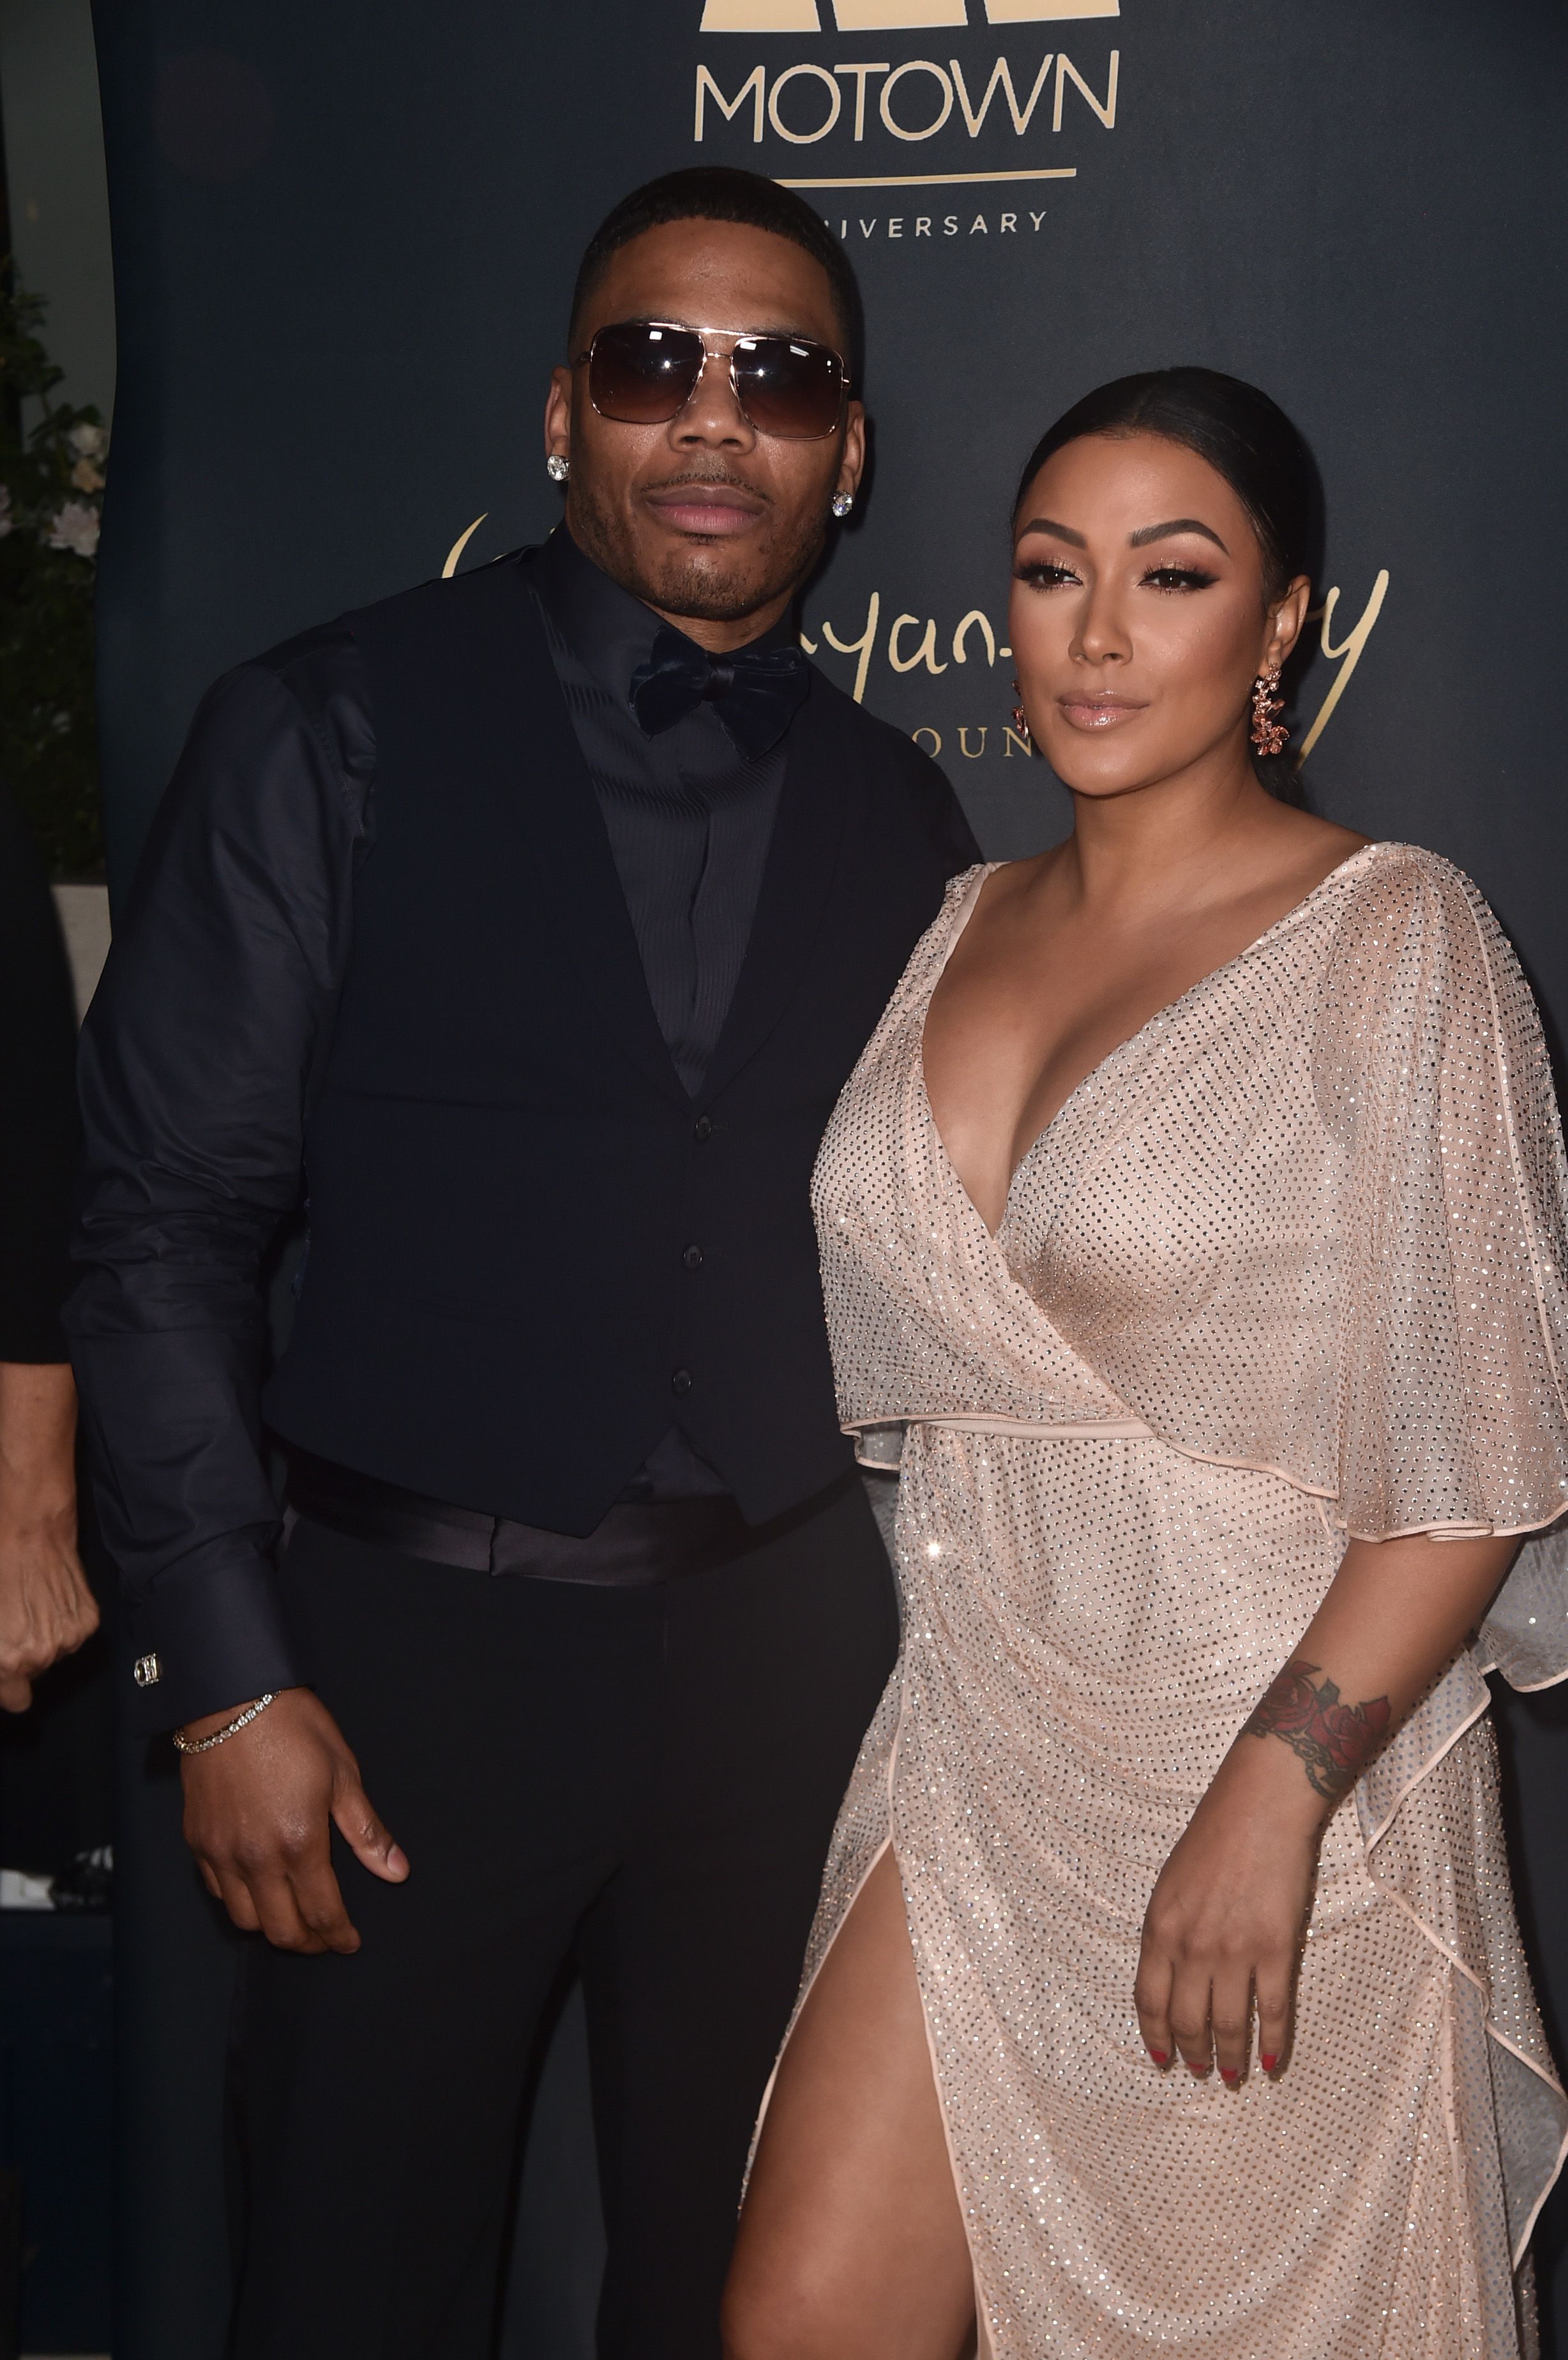 See How Nelly's Girlfriend Shantel Jackson Celebrated Her Birthday in